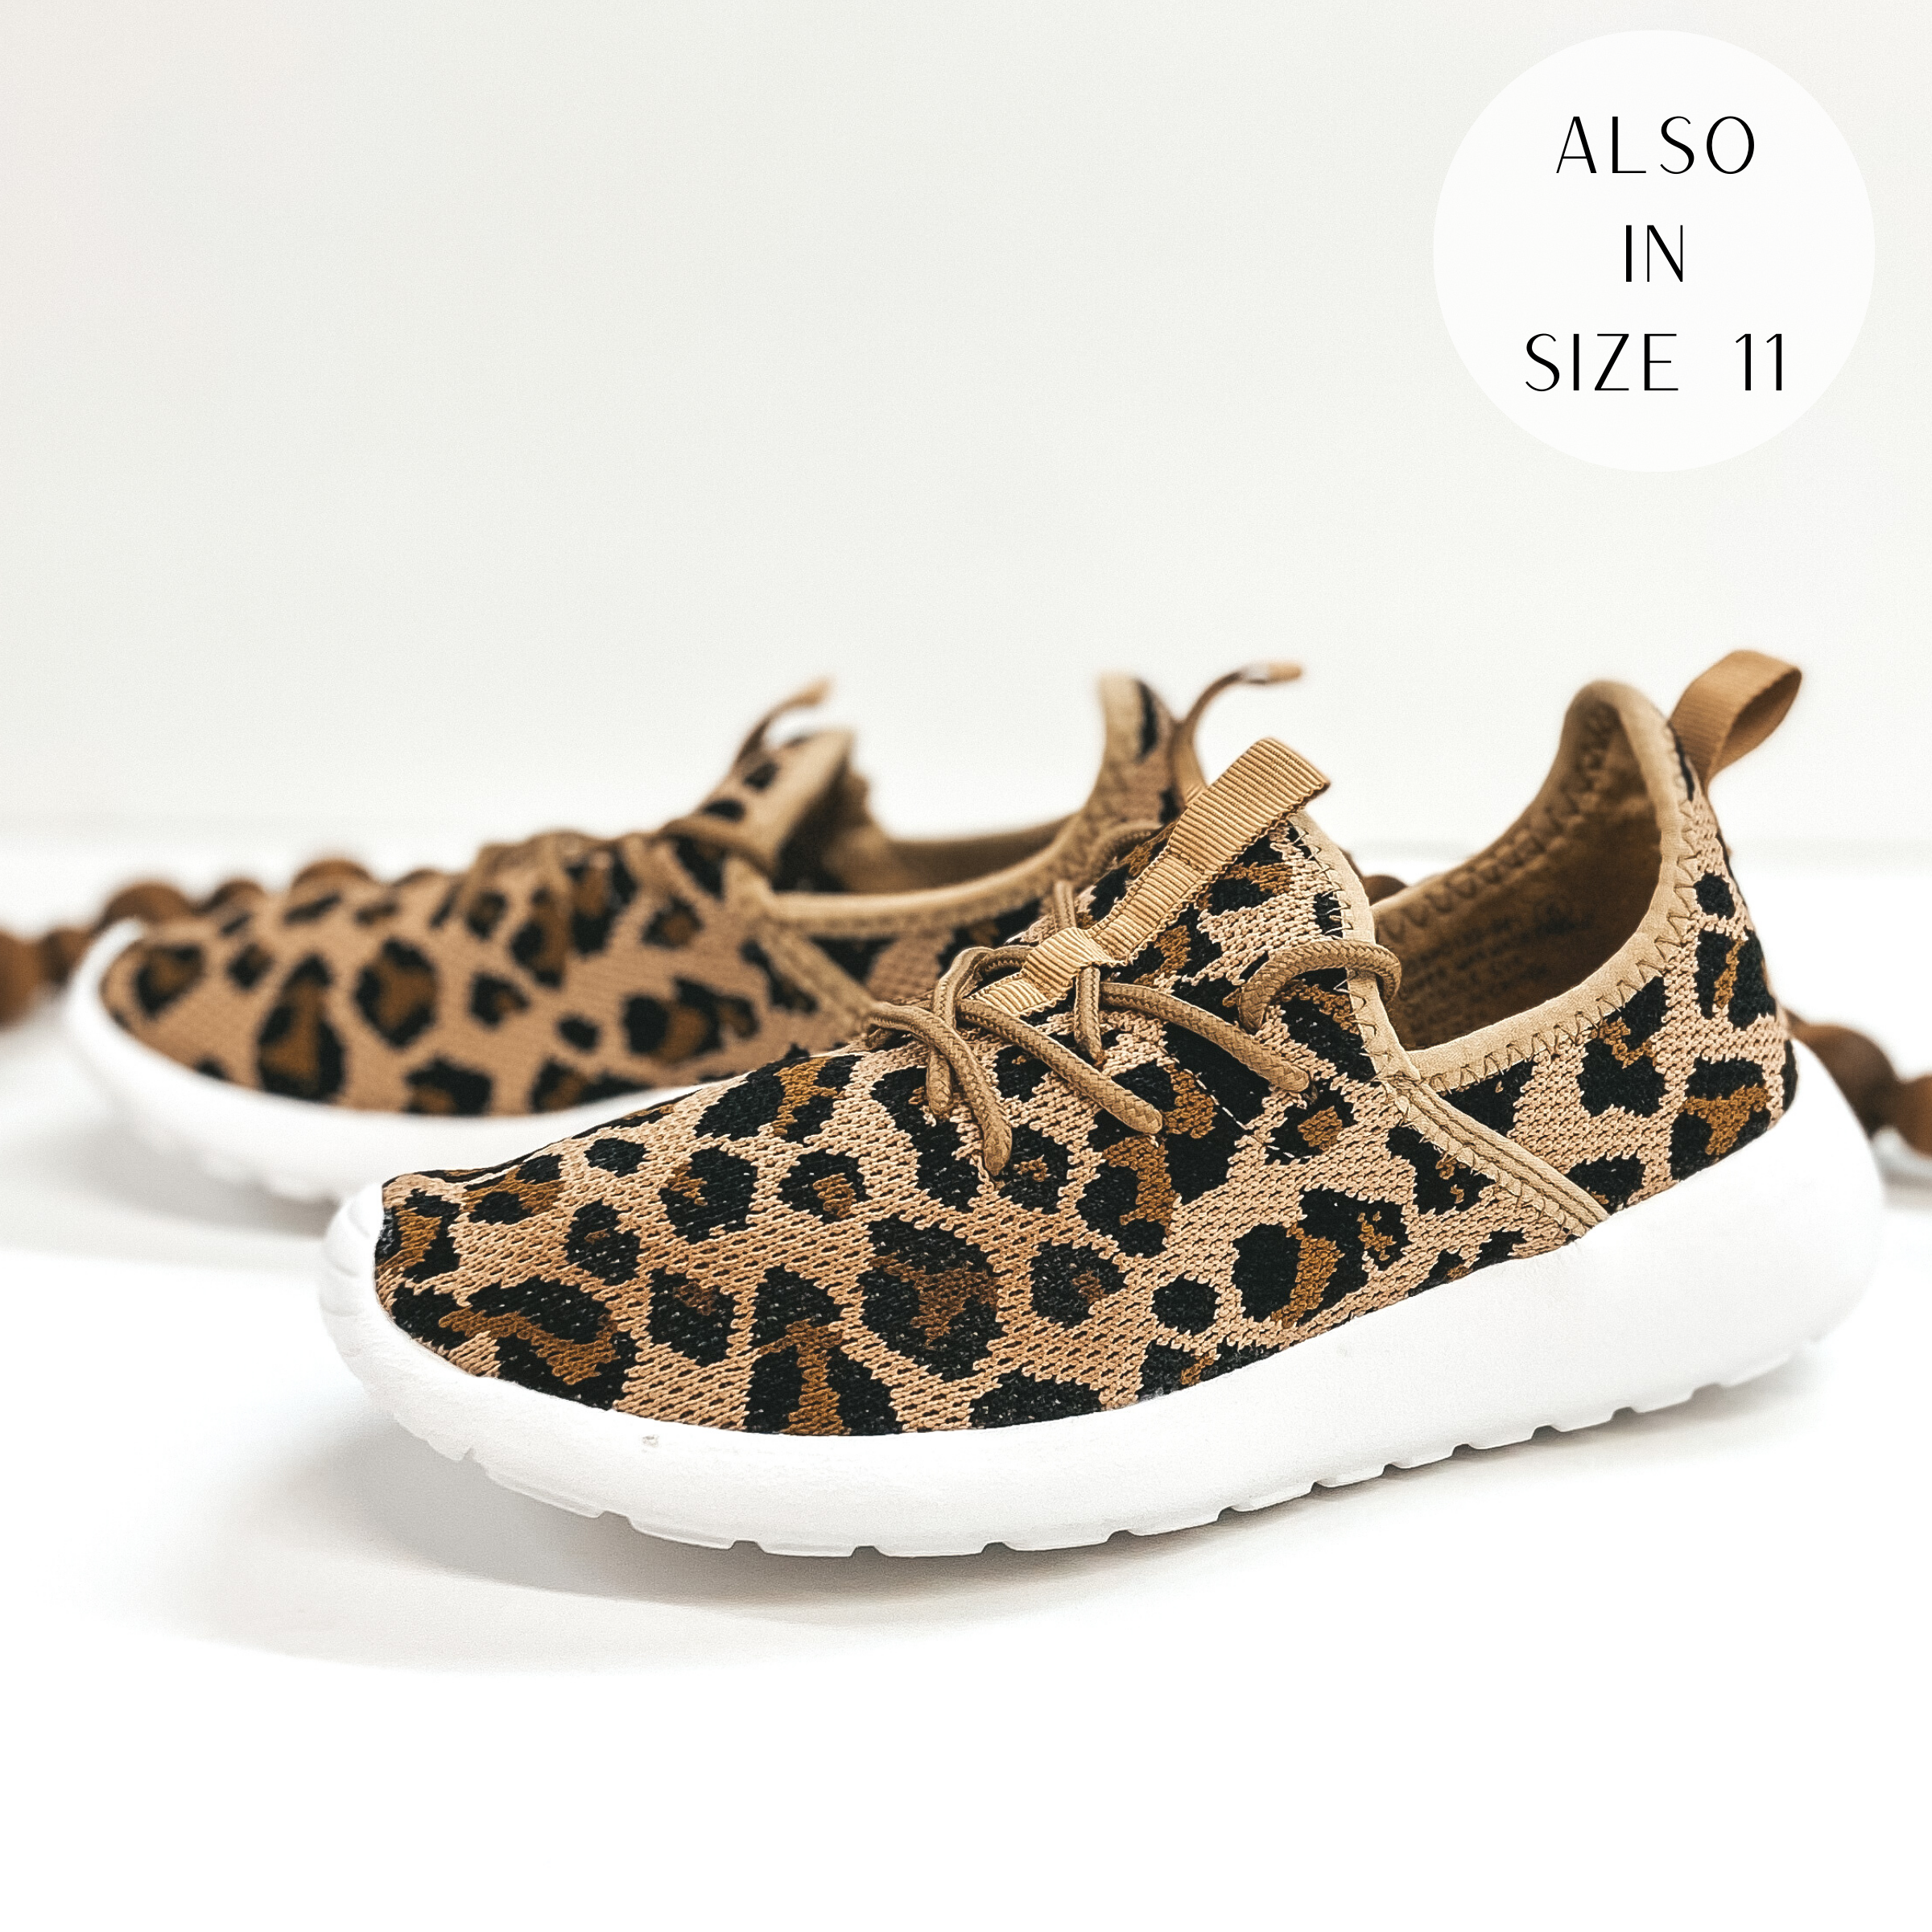 A pair of leopard print lace up sneakers. Pictured on white background with brown beads.